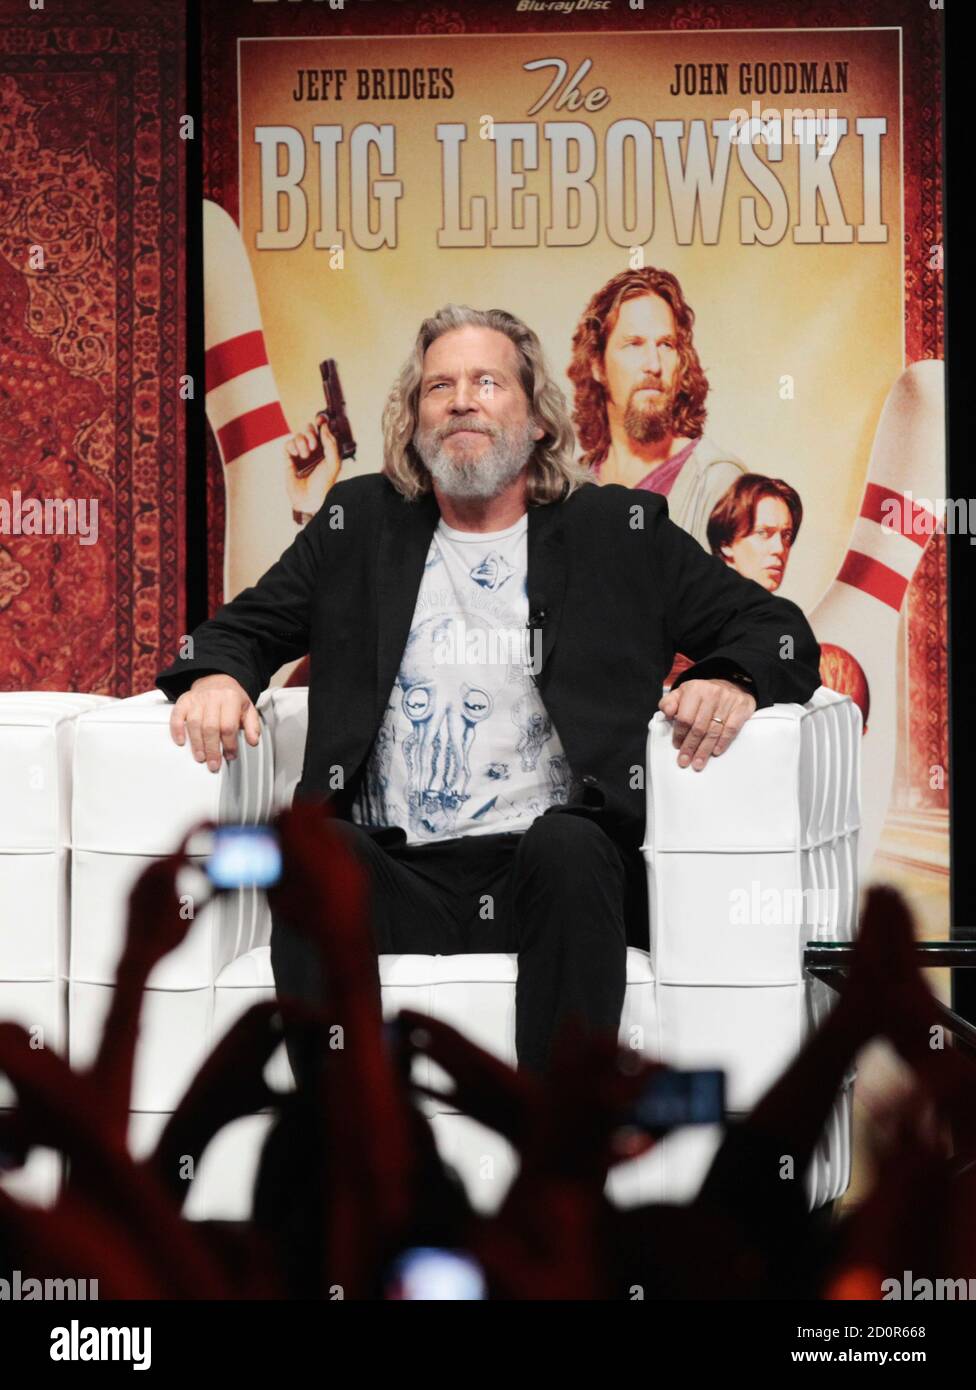 Cast member Jeff Bridges listens to applause during a question-and-answer  session at an event celebrating the Blu-Ray dvd release of the film "The  Big Lebowski" in New York August 16, 2011. REUTERS/Lucas